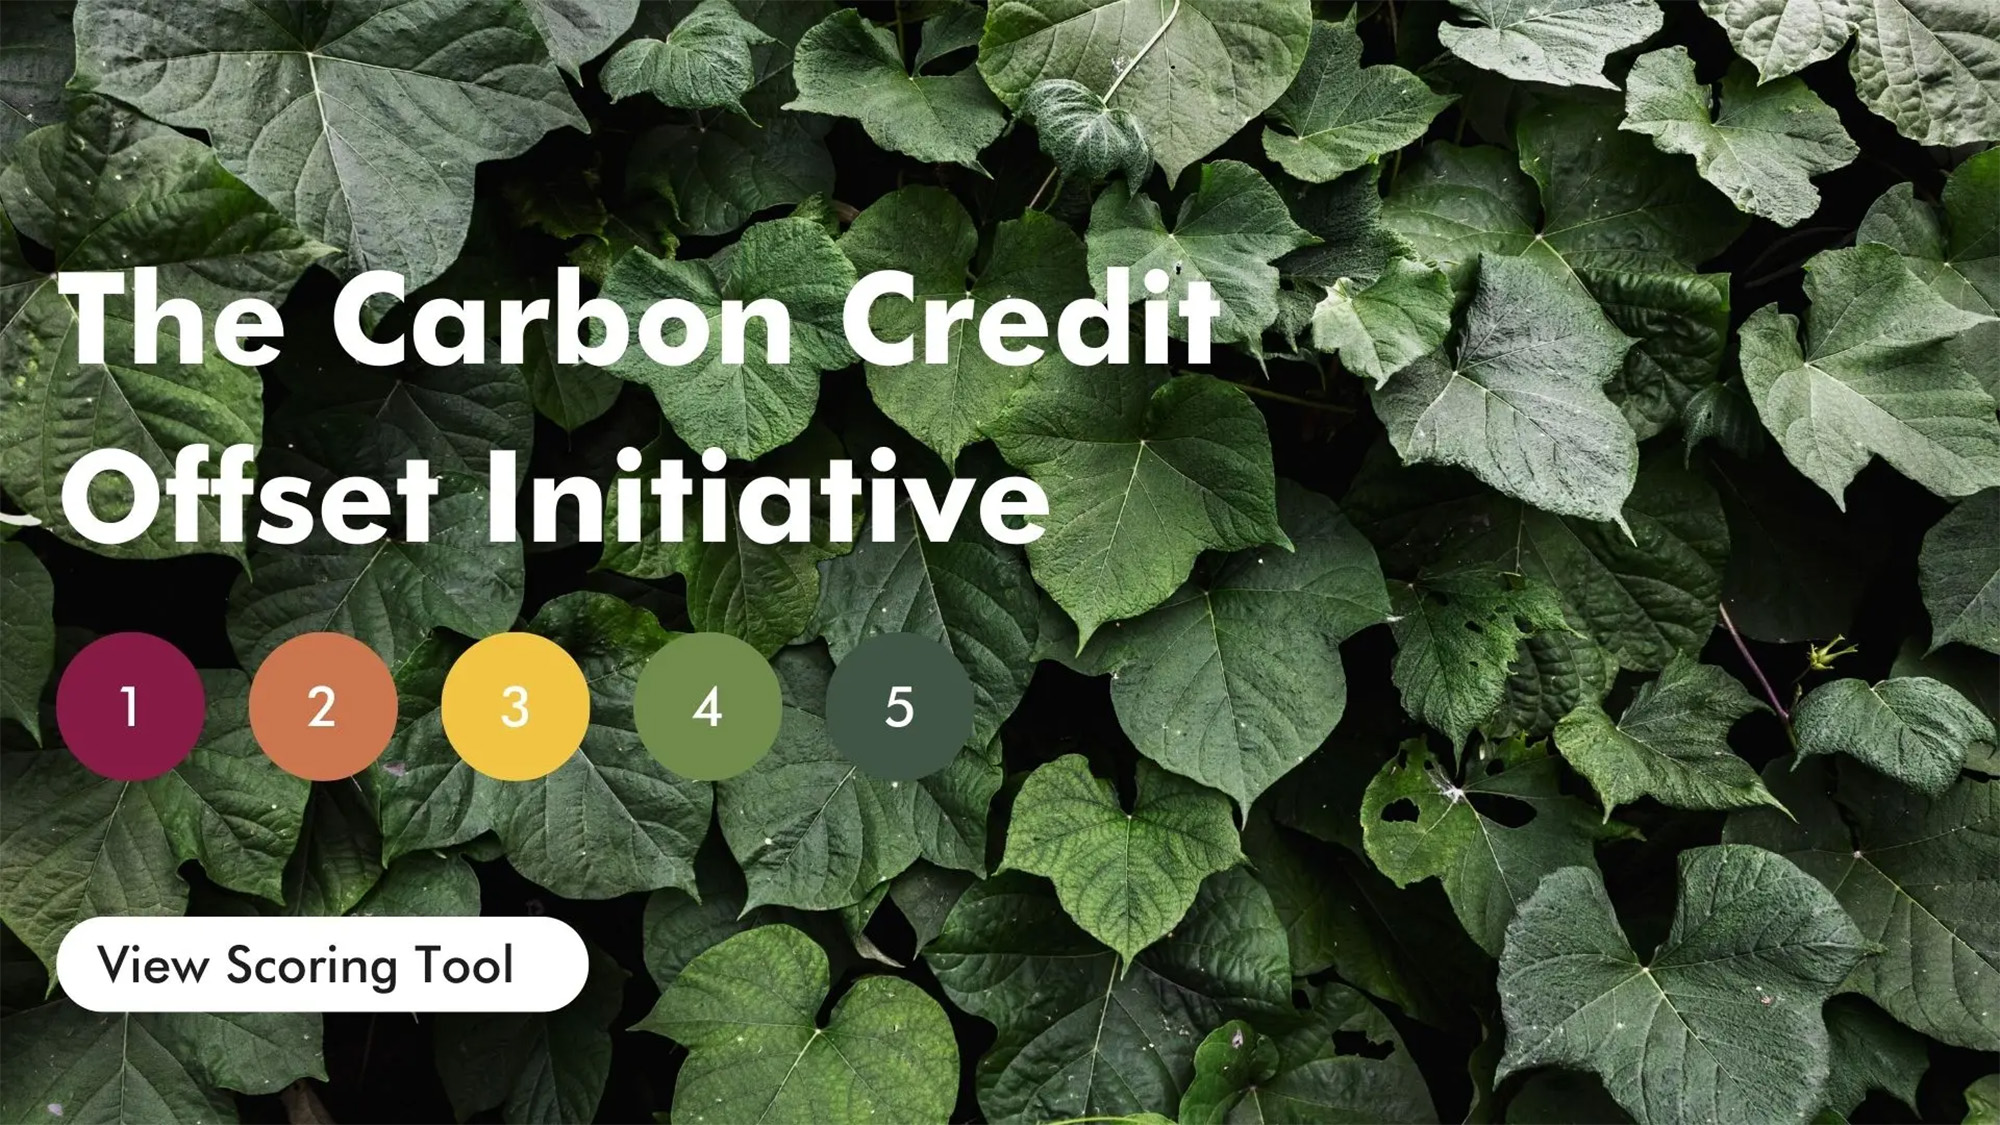 The Carbon Credit Offset Initiative